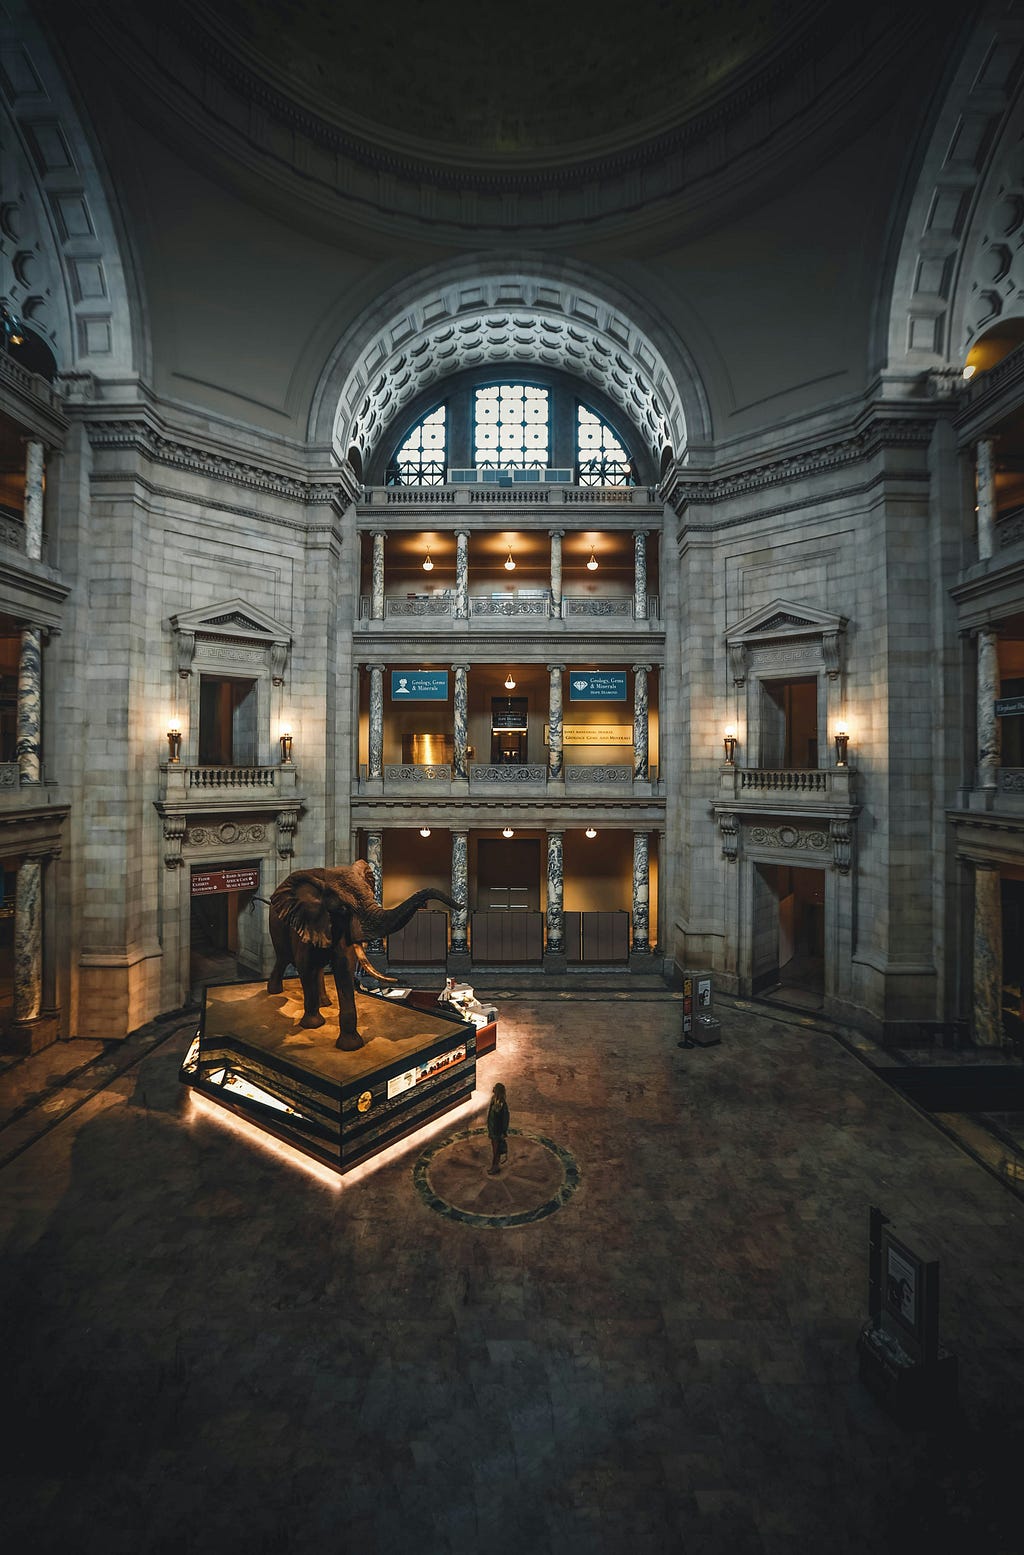 An African elephant sculpture stands on a platform in an atrium that is more than 3 storeys high. A person stands nearby looking at the sculpture. They appear tiny in comparison.